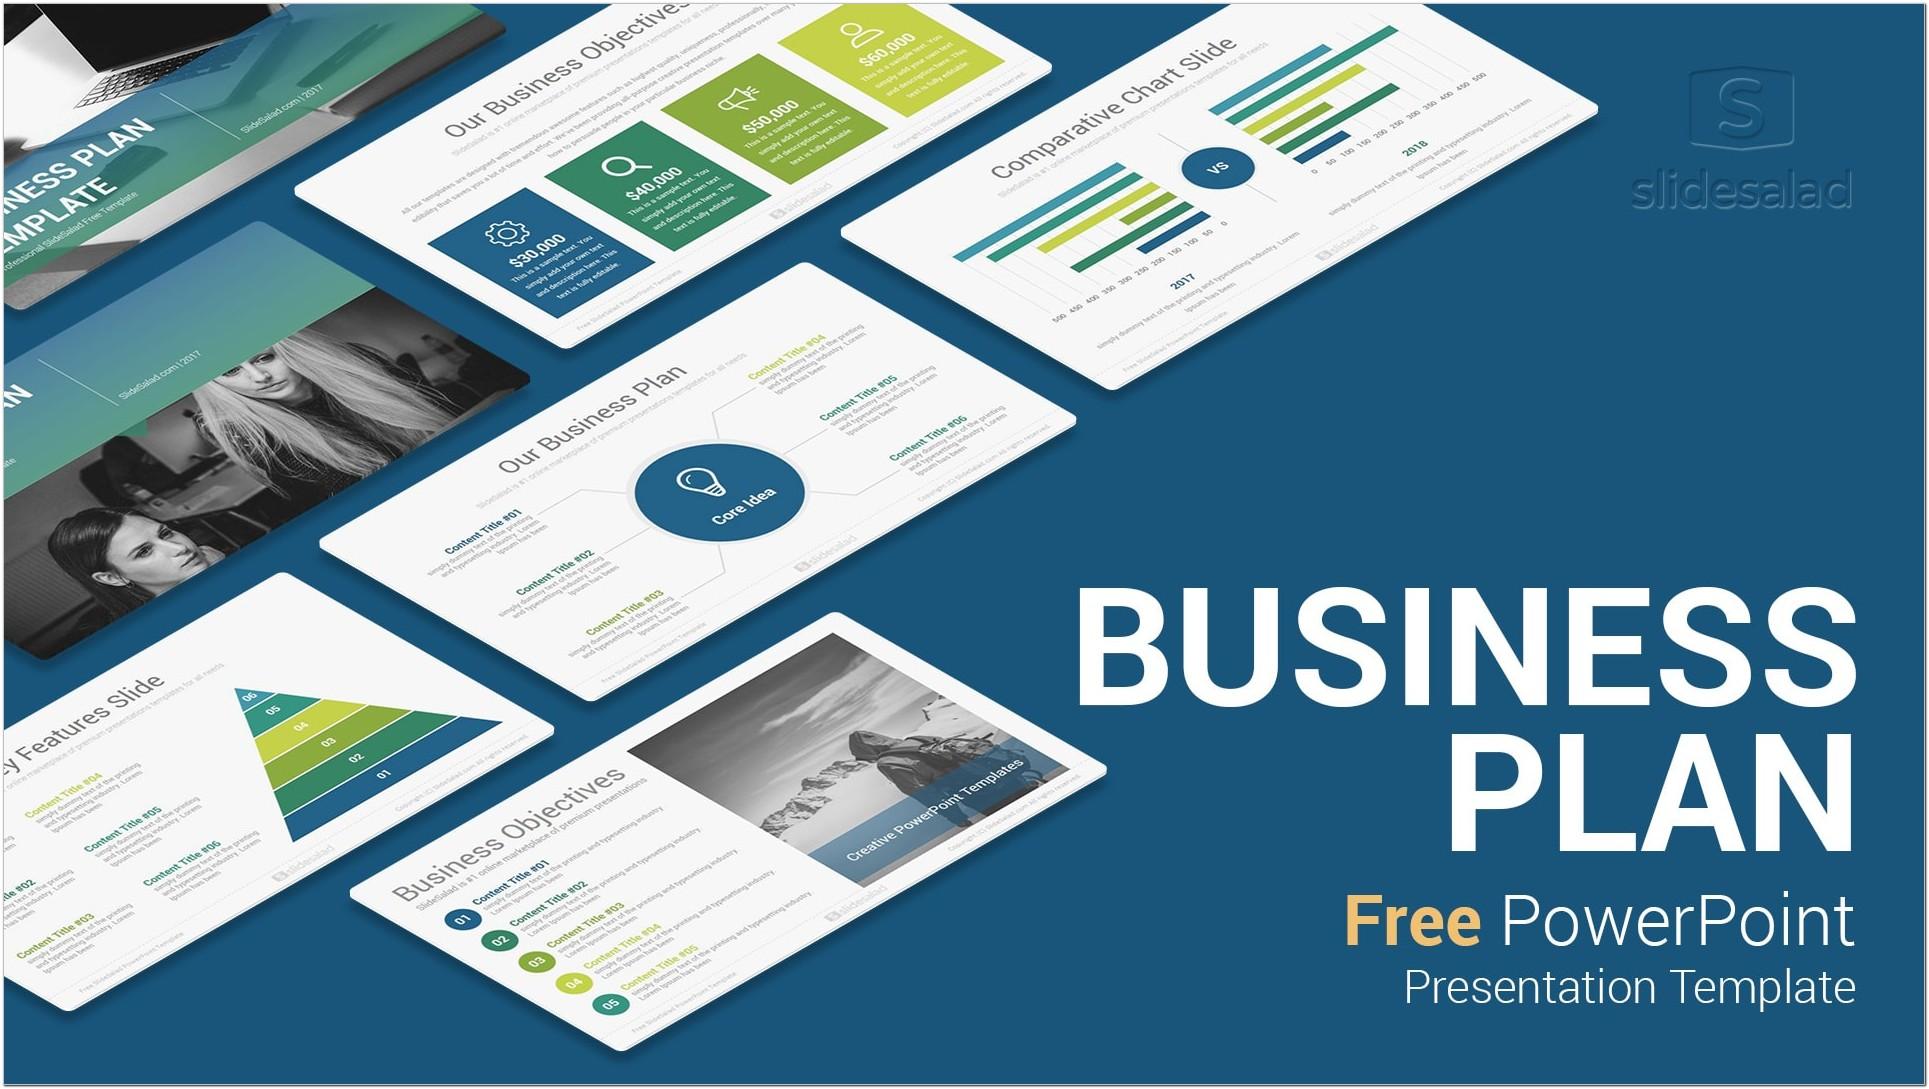 Best Business Plan Template Ppt Free Download